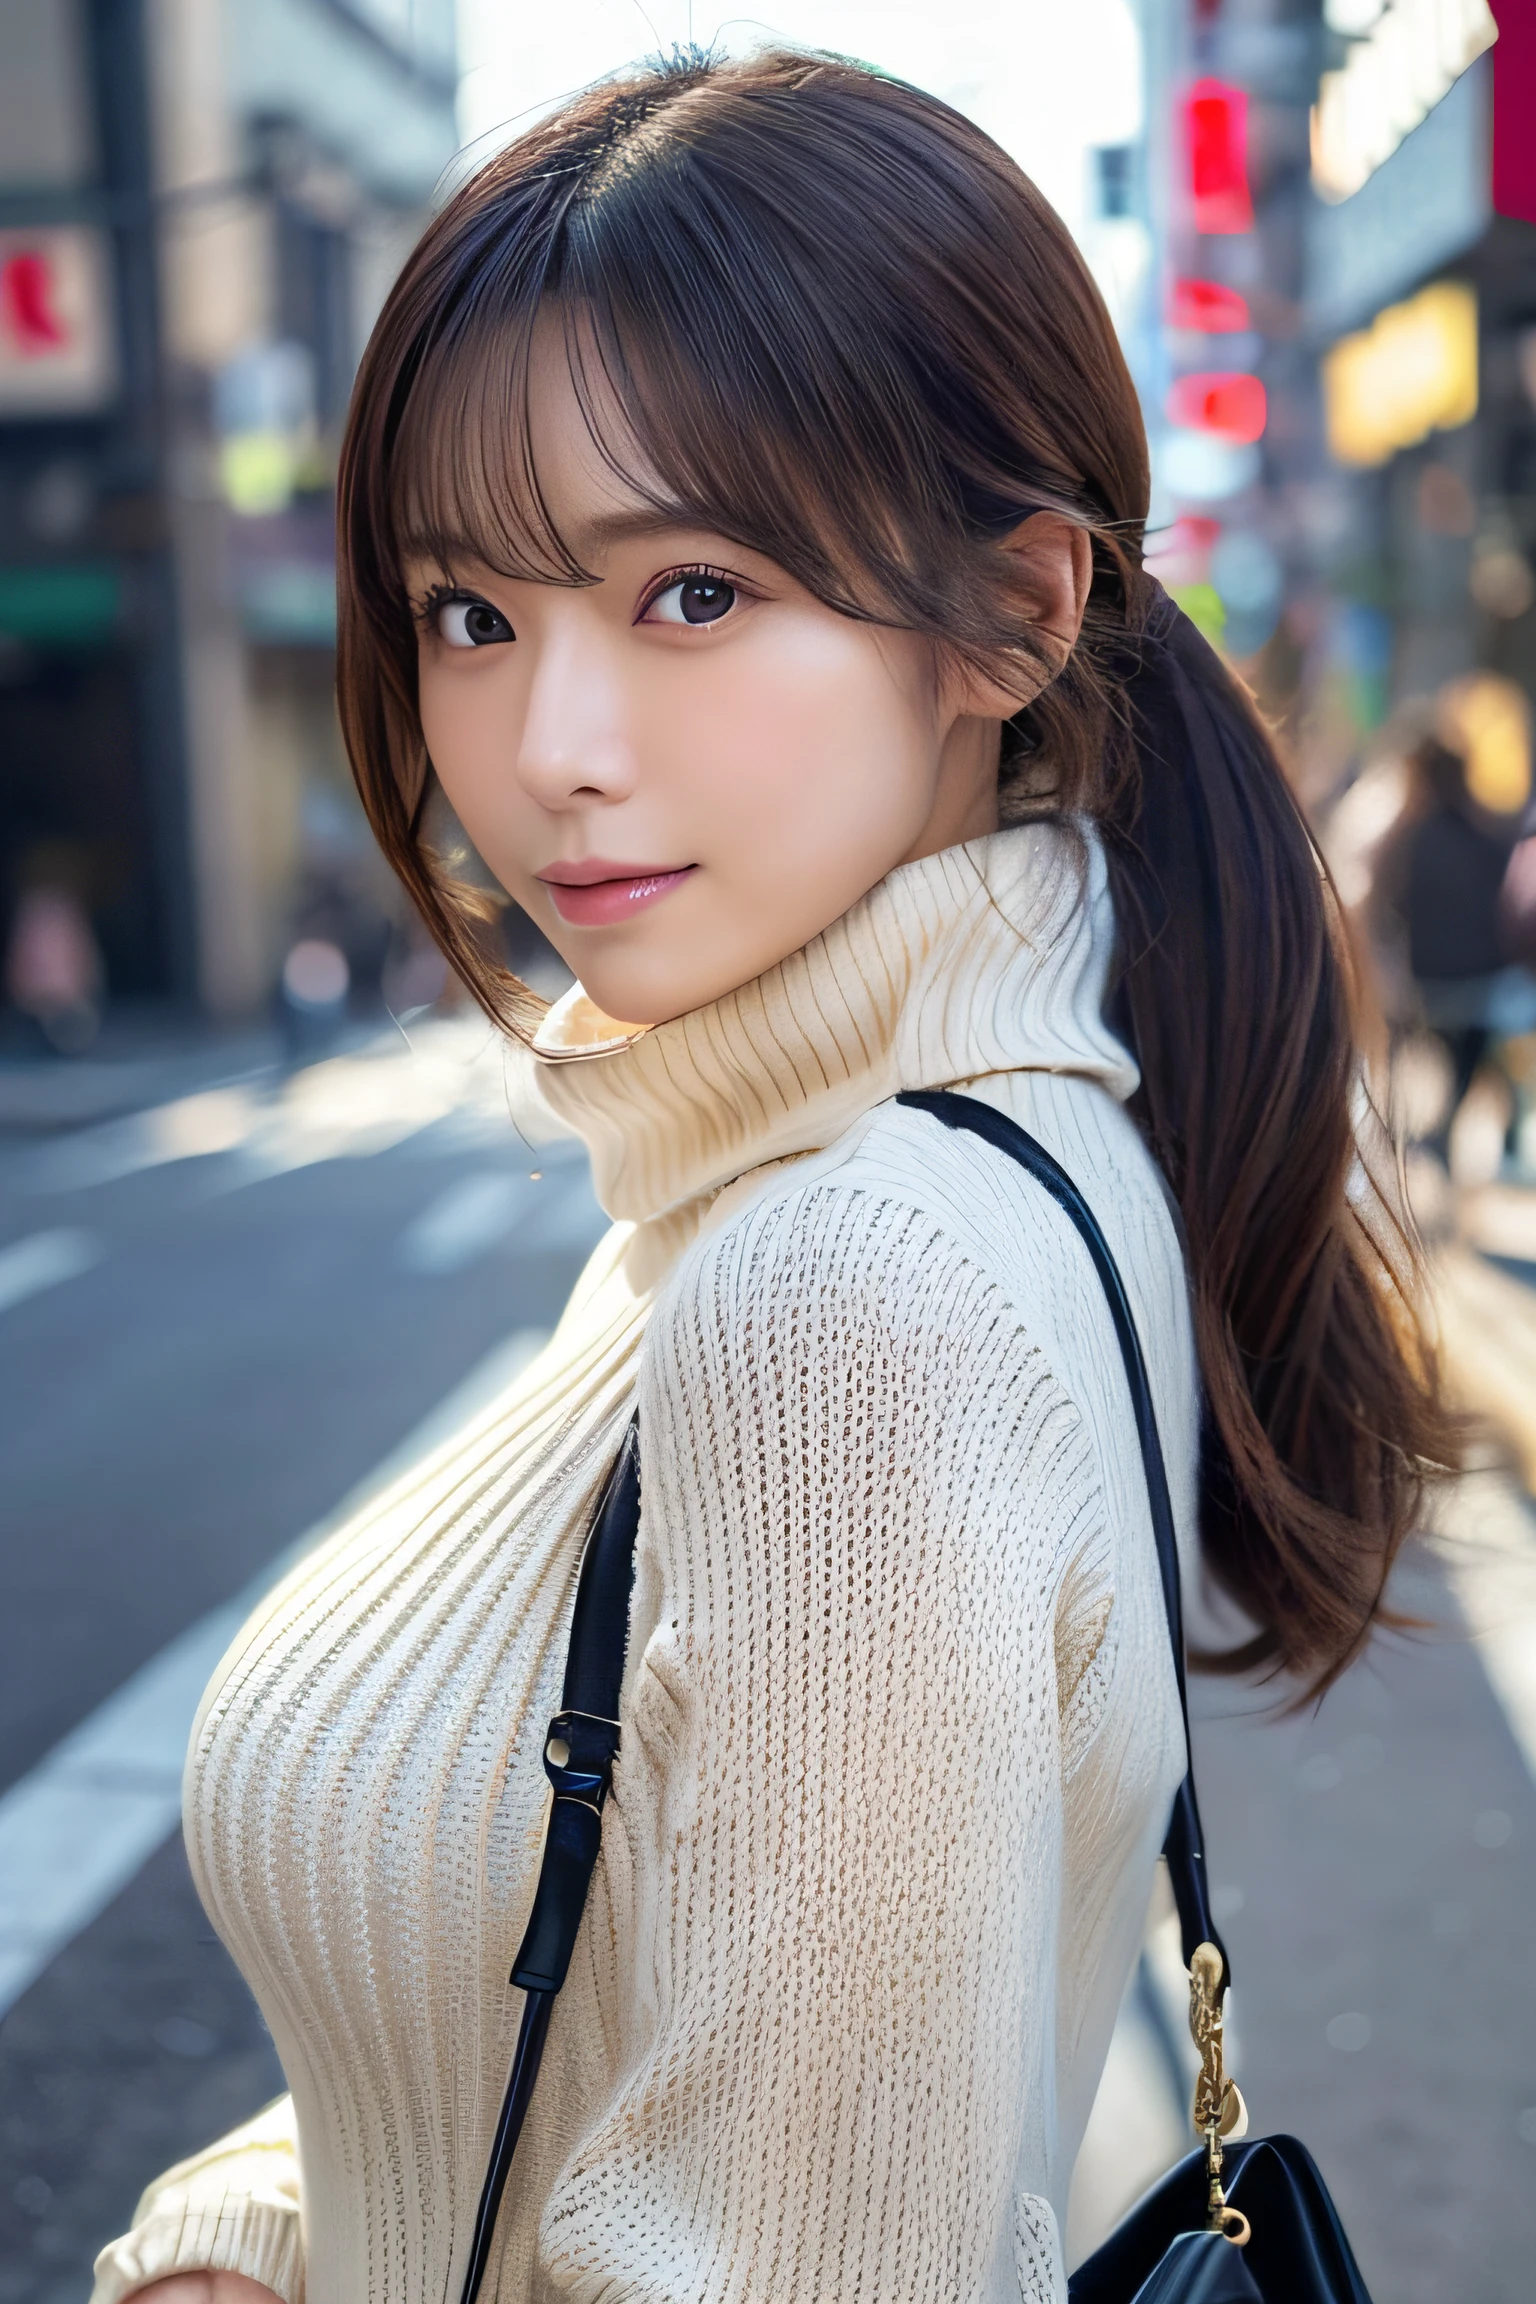 (Colossal 、Turtleneck knitwear、Shoulder bag)、(top-quality,​masterpiece:1.3,超A high resolution,),(ultra-detailliert,Caustics),(Photorealsitic:1.4,RAW shooting,)Ultra-realistic capture,A highly detailed,high-definition16Kfor human skin、 Skin texture is natural、、The skin looks healthy with an even tone、 Use natural light and color,One Woman,japanes,,kawaii,A dark-haired,Middle hair,(depth of fields、chromatic abberation、、Wide range of lighting、Natural Shading、)、(Hair swaying in the wind:1.2)、Streets of Tokyo